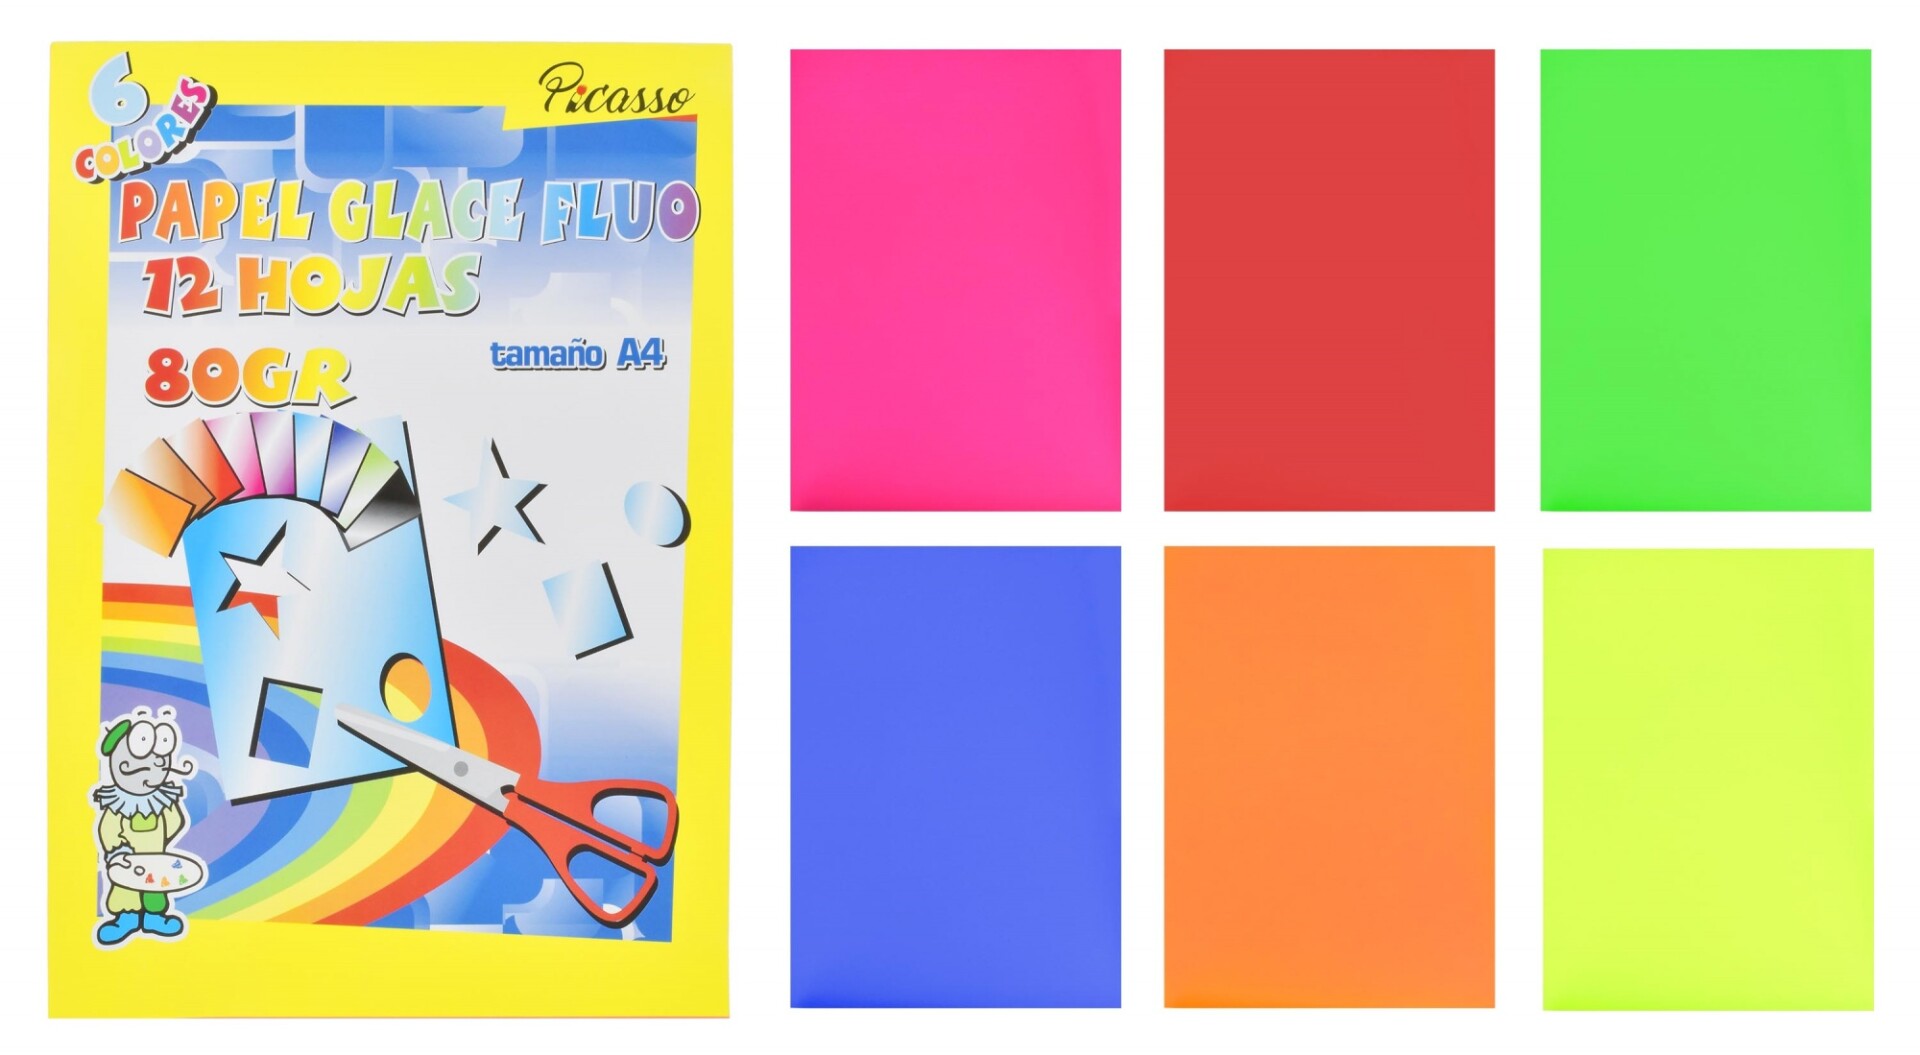 BLOCK PAPEL GLACE FLUO PICASSO X 12 HOJAS TAMAÑO A4 